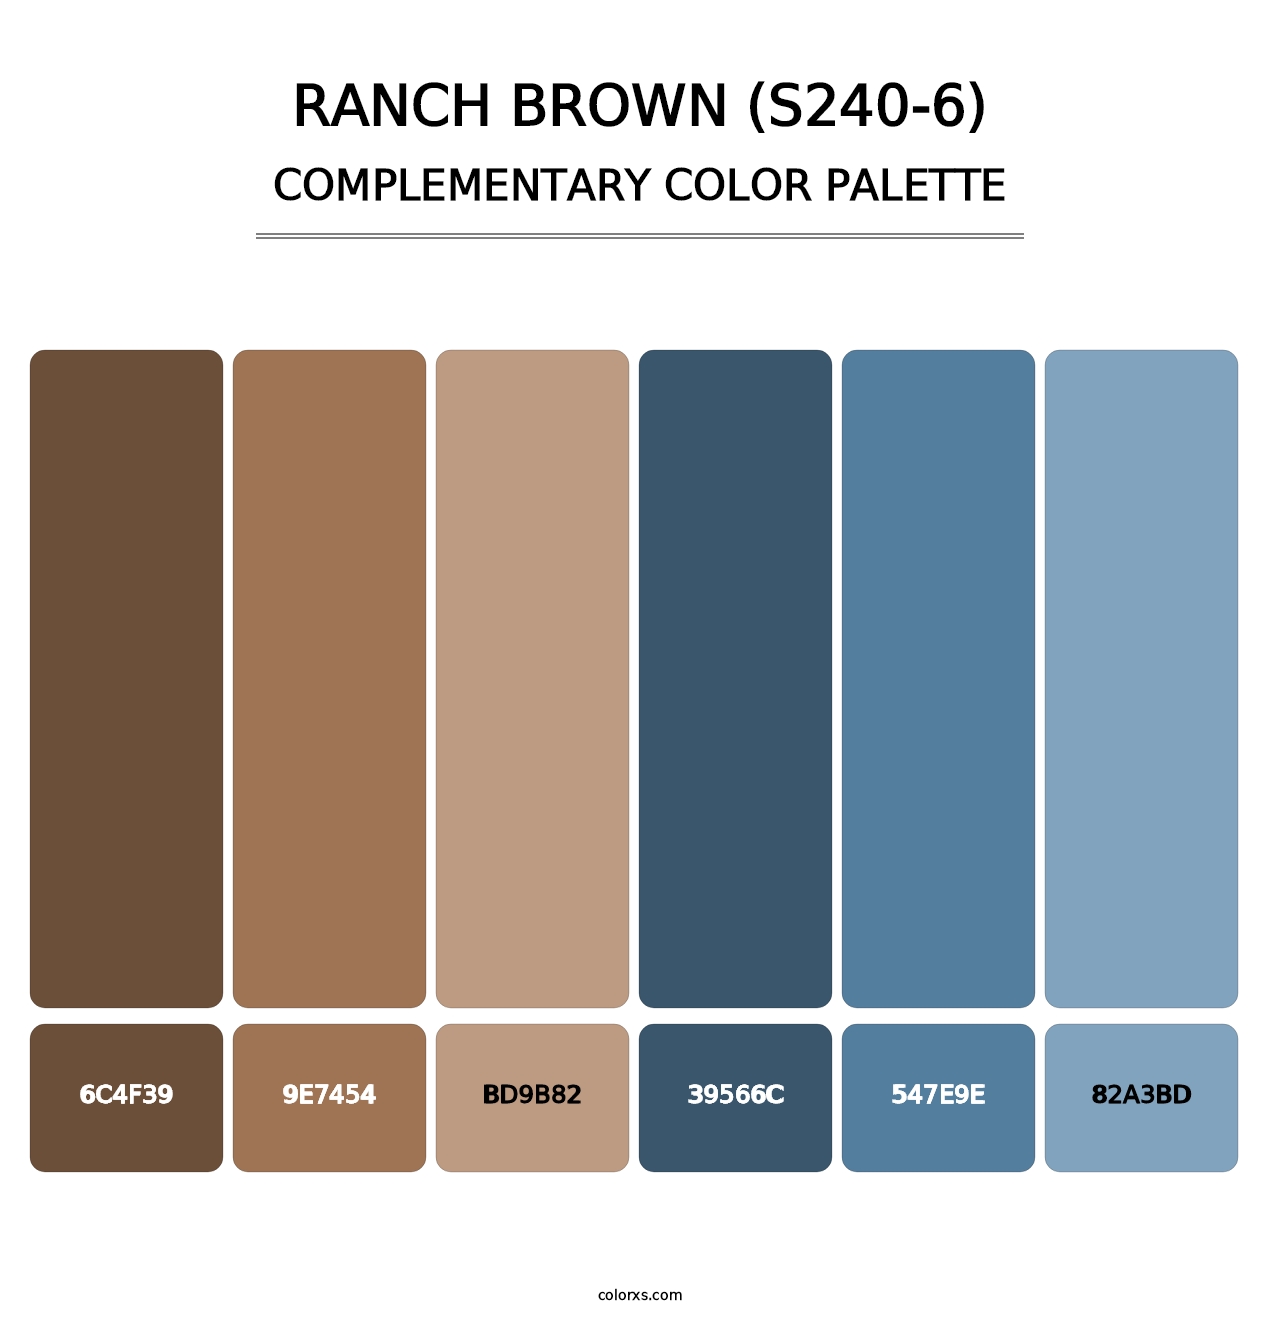 Ranch Brown (S240-6) - Complementary Color Palette